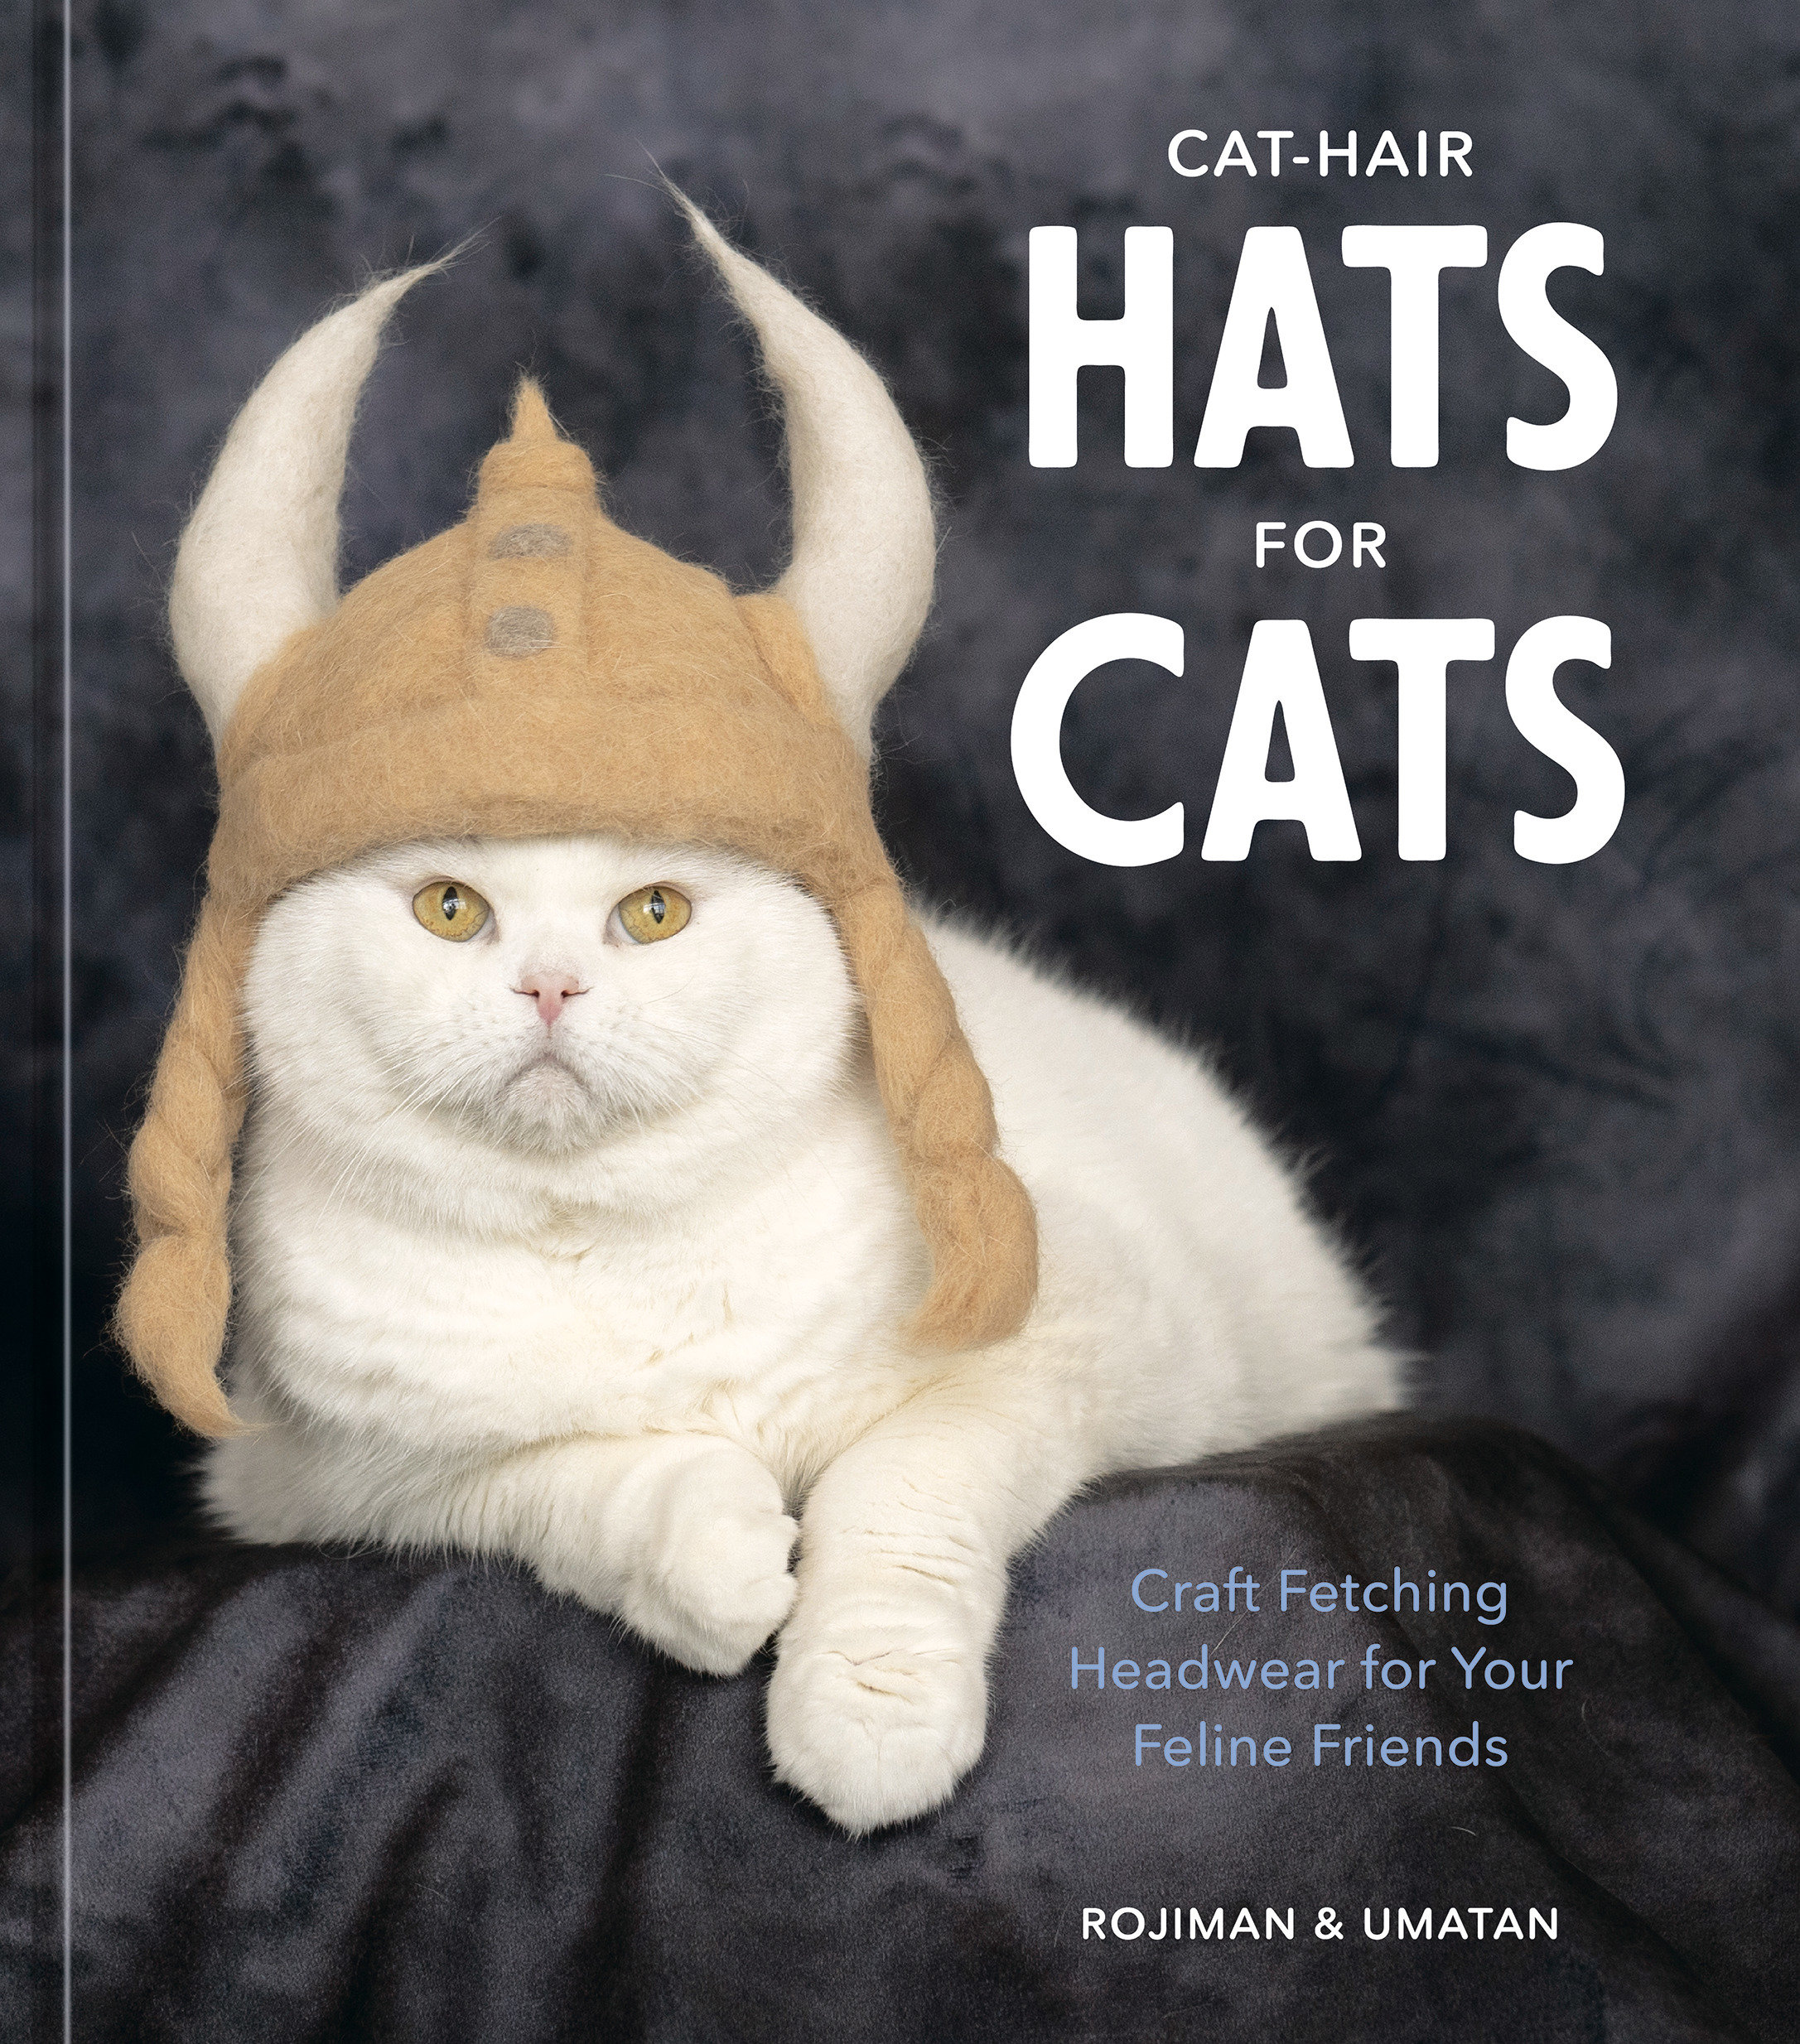 Cat-Hair Hats for Cats (Hardcover Book)